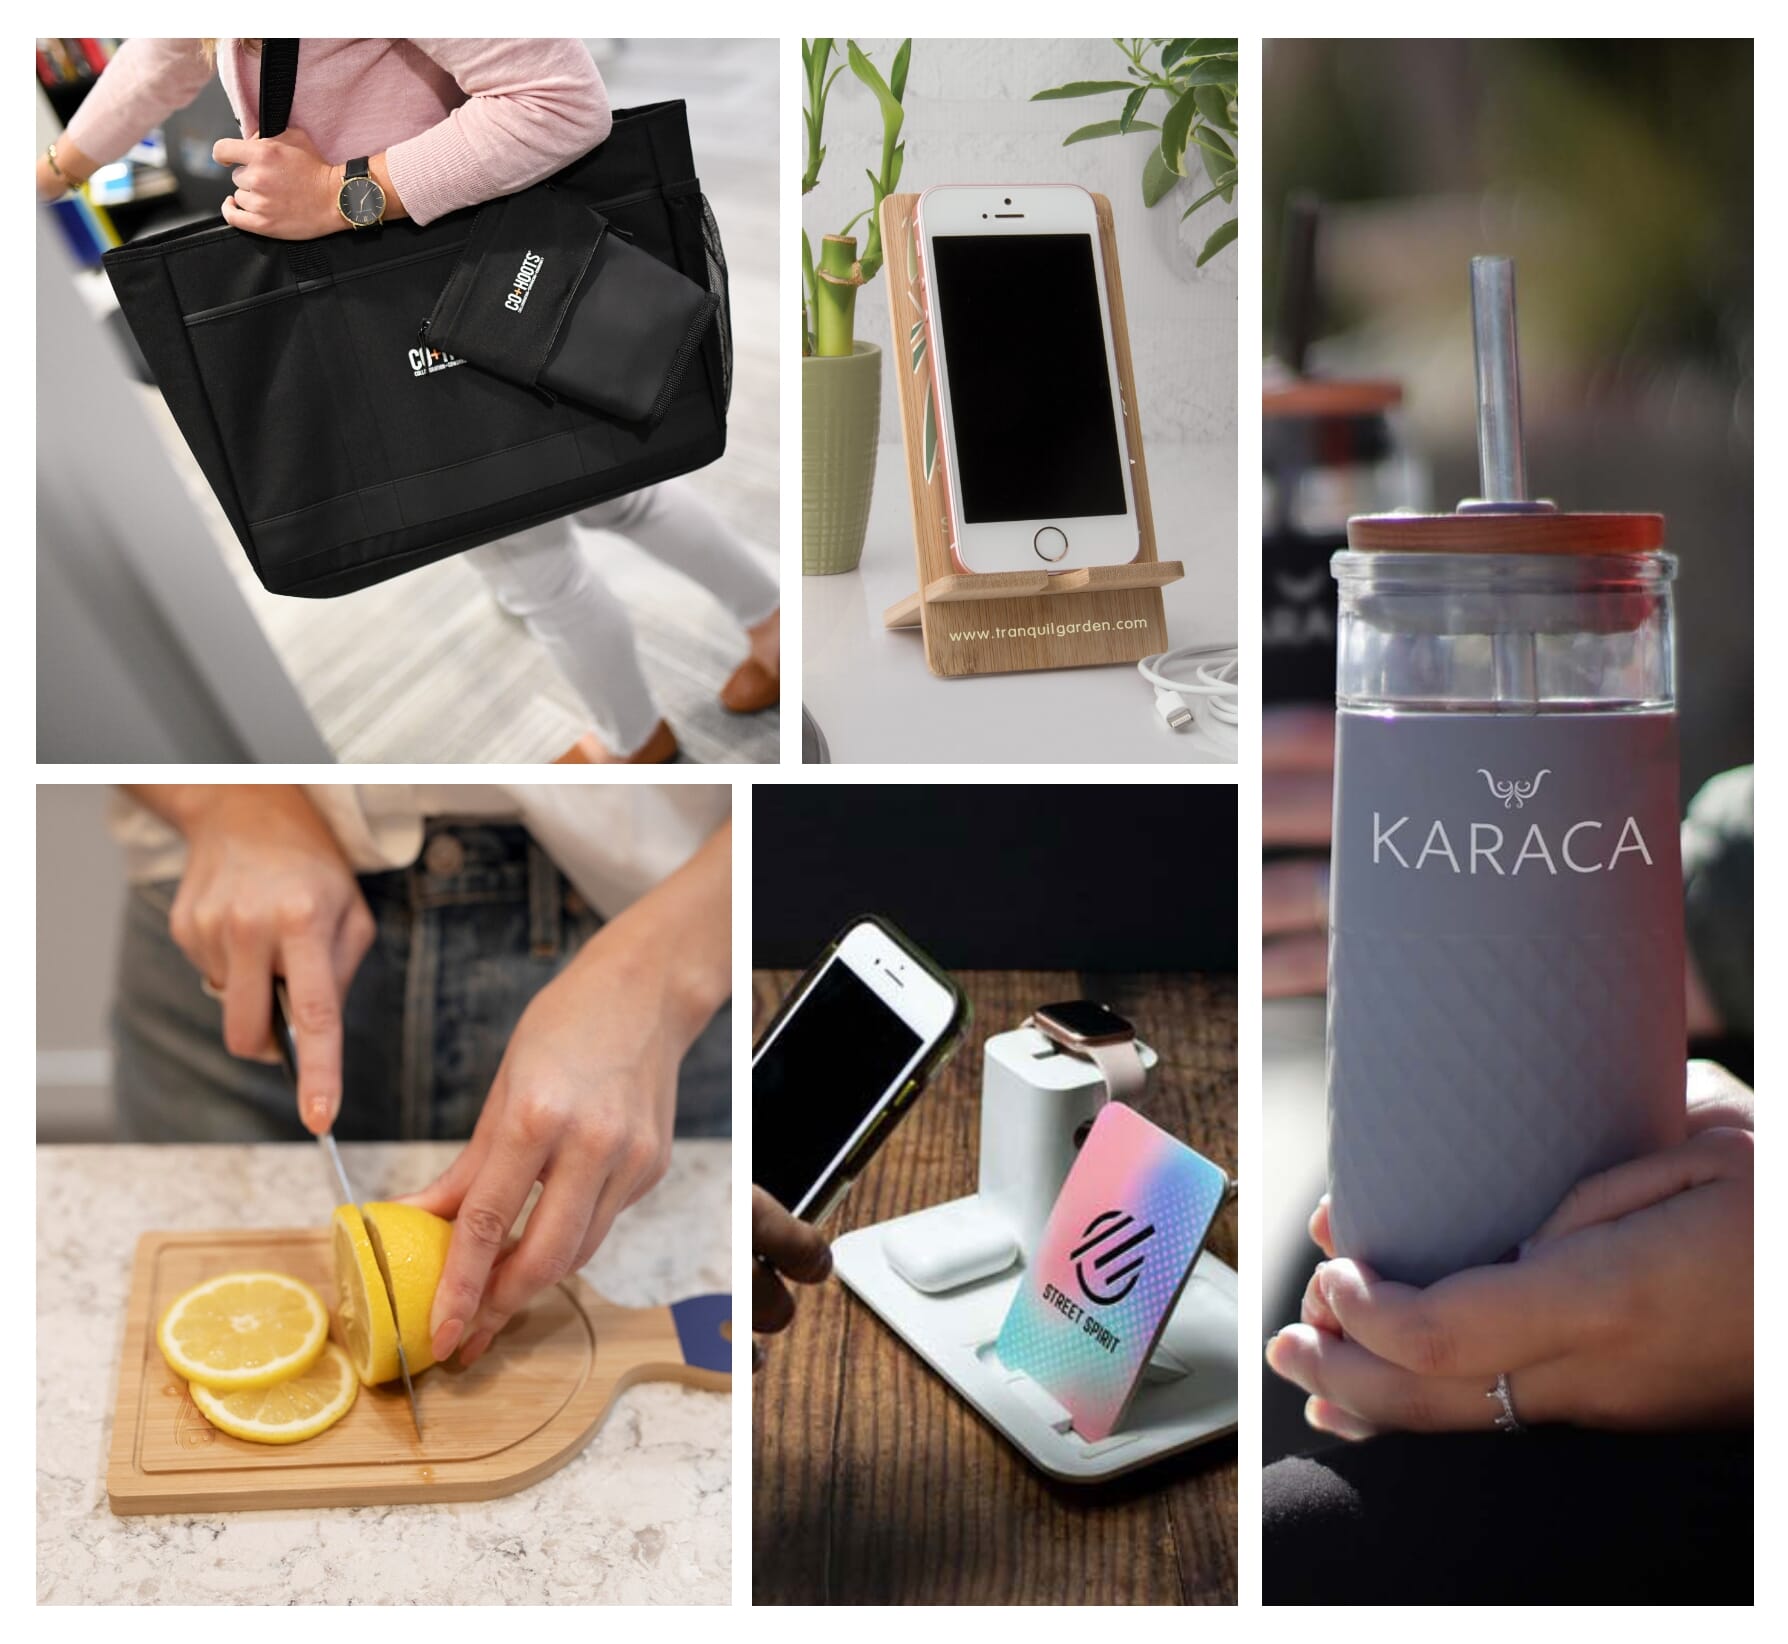 The Ultimate Guide to Gifts for Employees – Awesome Ideas for Every Budget & Occasion